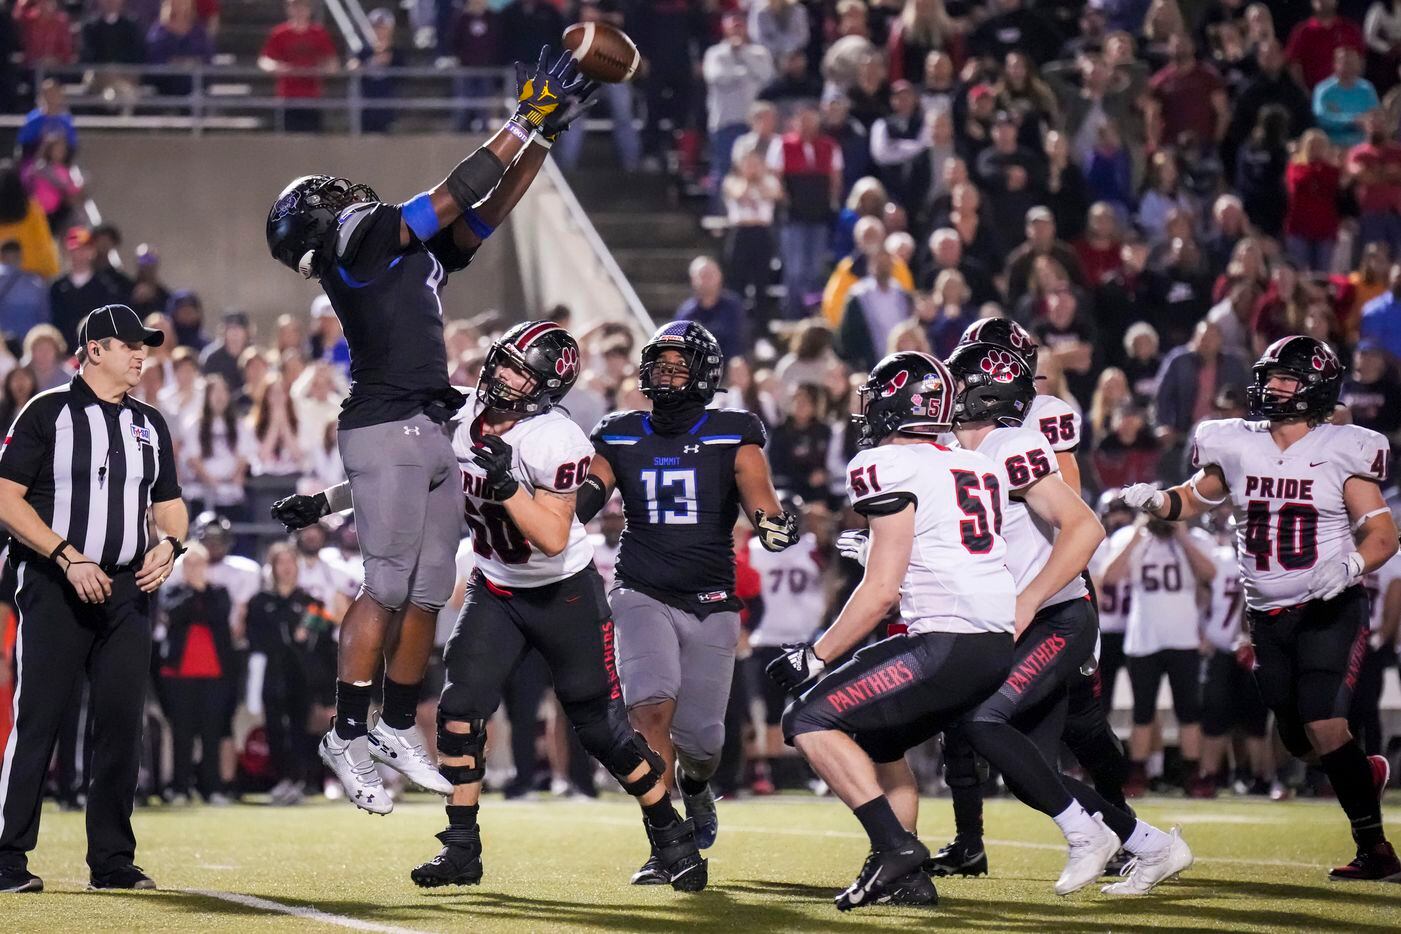 Mansfield Summit defensive lineman Joseph Adedire (4) leaps to catch the ball over Colleyville Heritage offensive lineman William Baum (60) after a blocked Colleyville Heritage field goal attempt during the second half of the Class 5A Division I Region I final on Friday, Dec. 3, 2021, in North Richland Hills, Texas. (Smiley N. Pool/The Dallas Morning News)